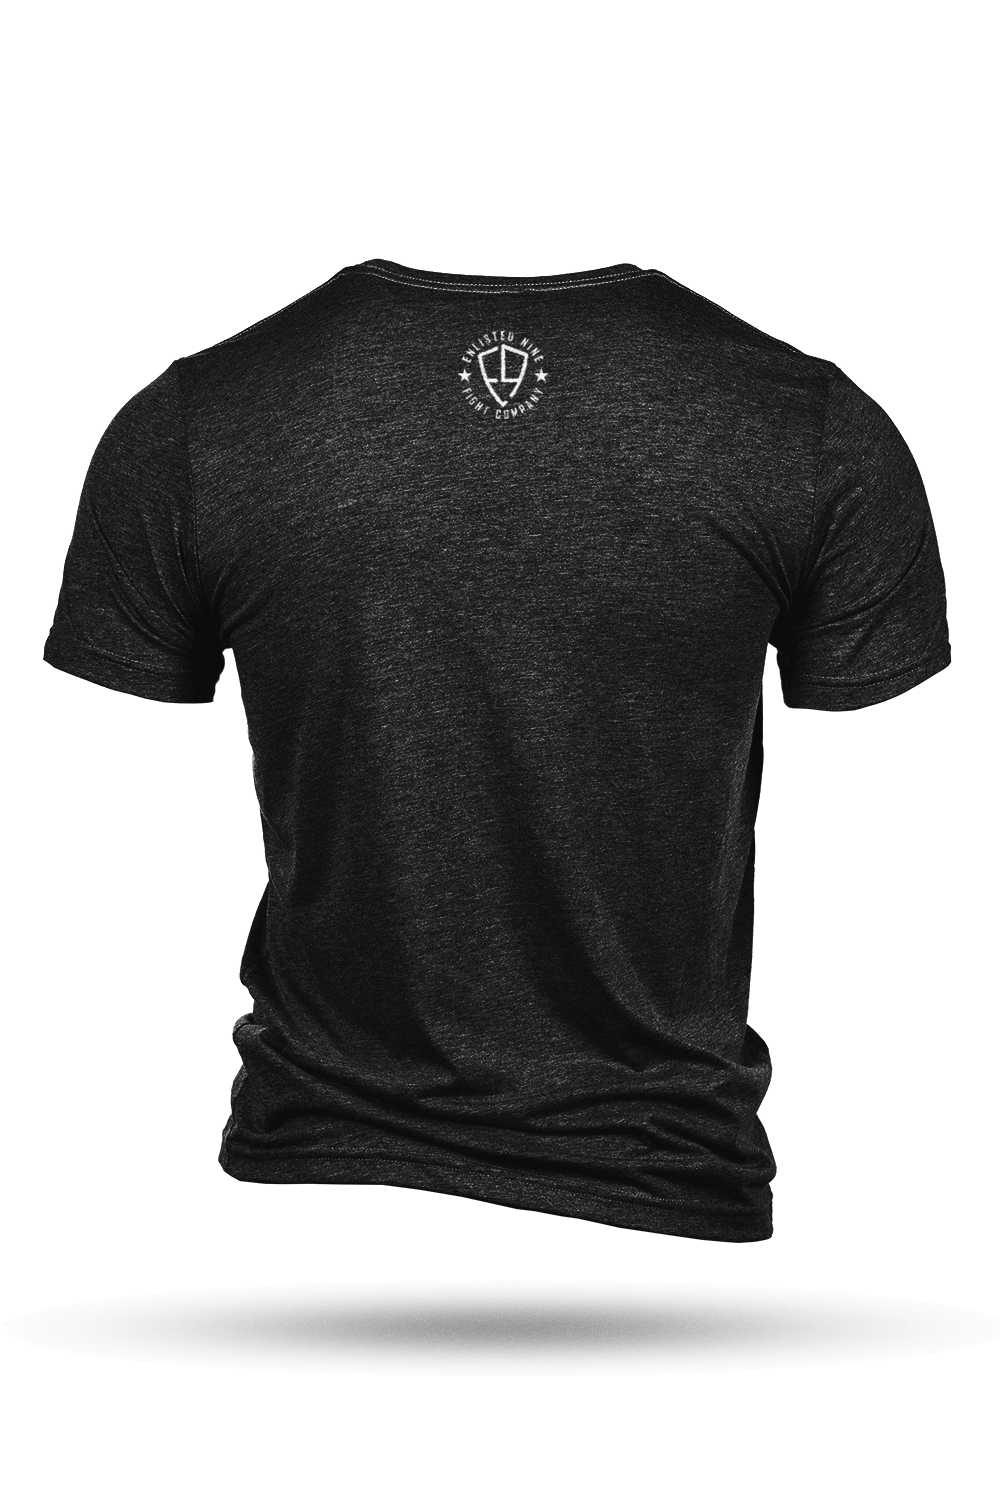 Enlisted 9 - Tri-Blend T-Shirt - Texas Come and Take It